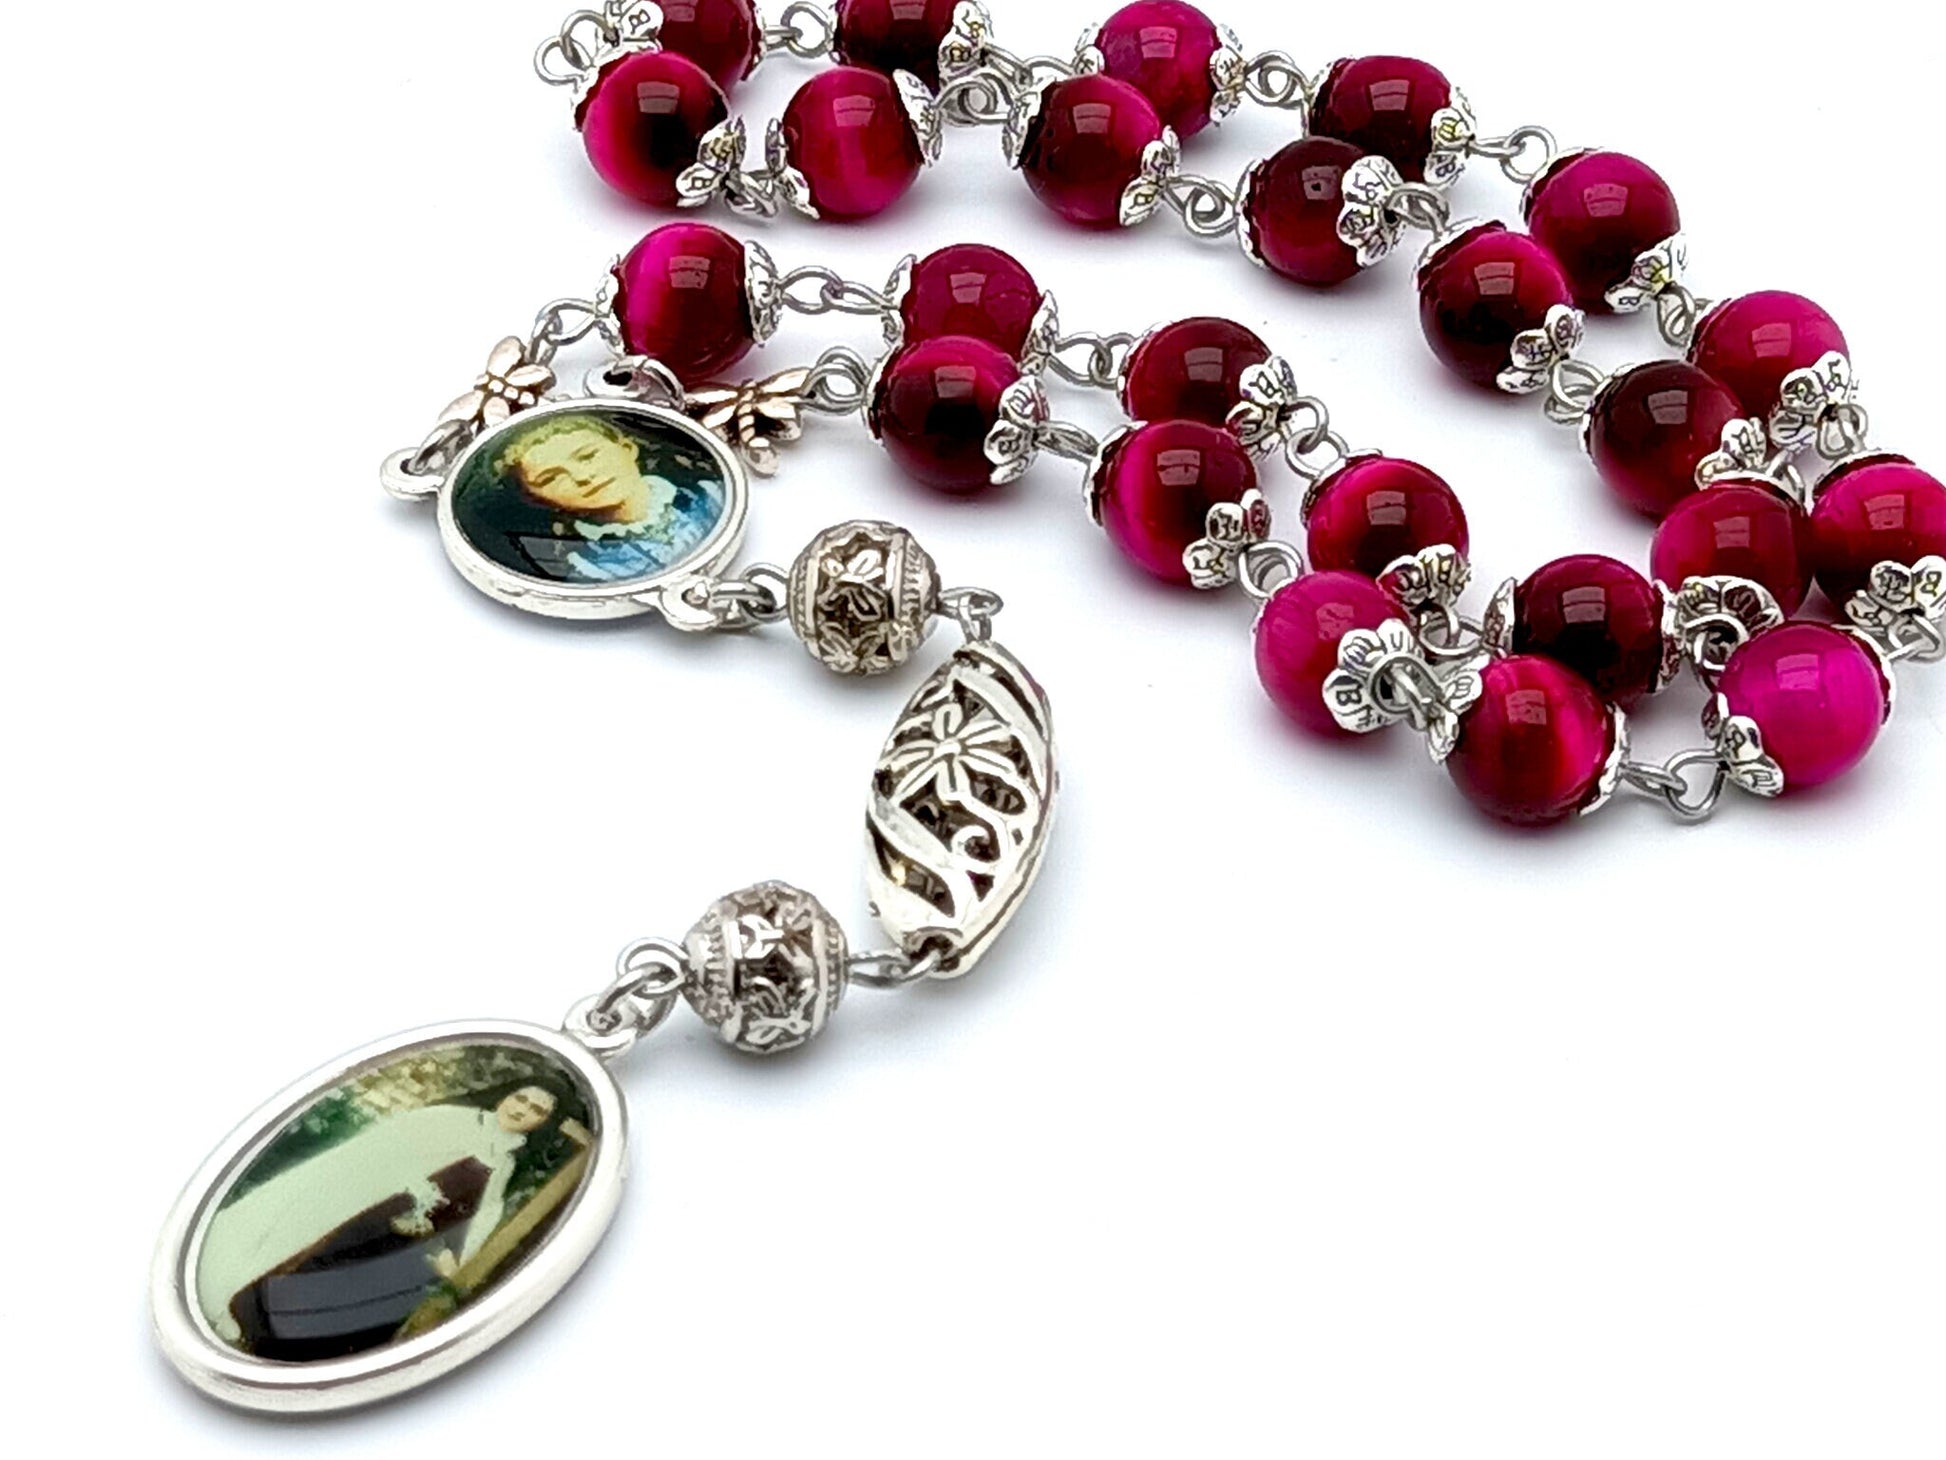 Saint Therese of Lisieux unique rosary beads prayer chaplet with pink tigers eye gemstone and silver beads, picture end and centre medals.